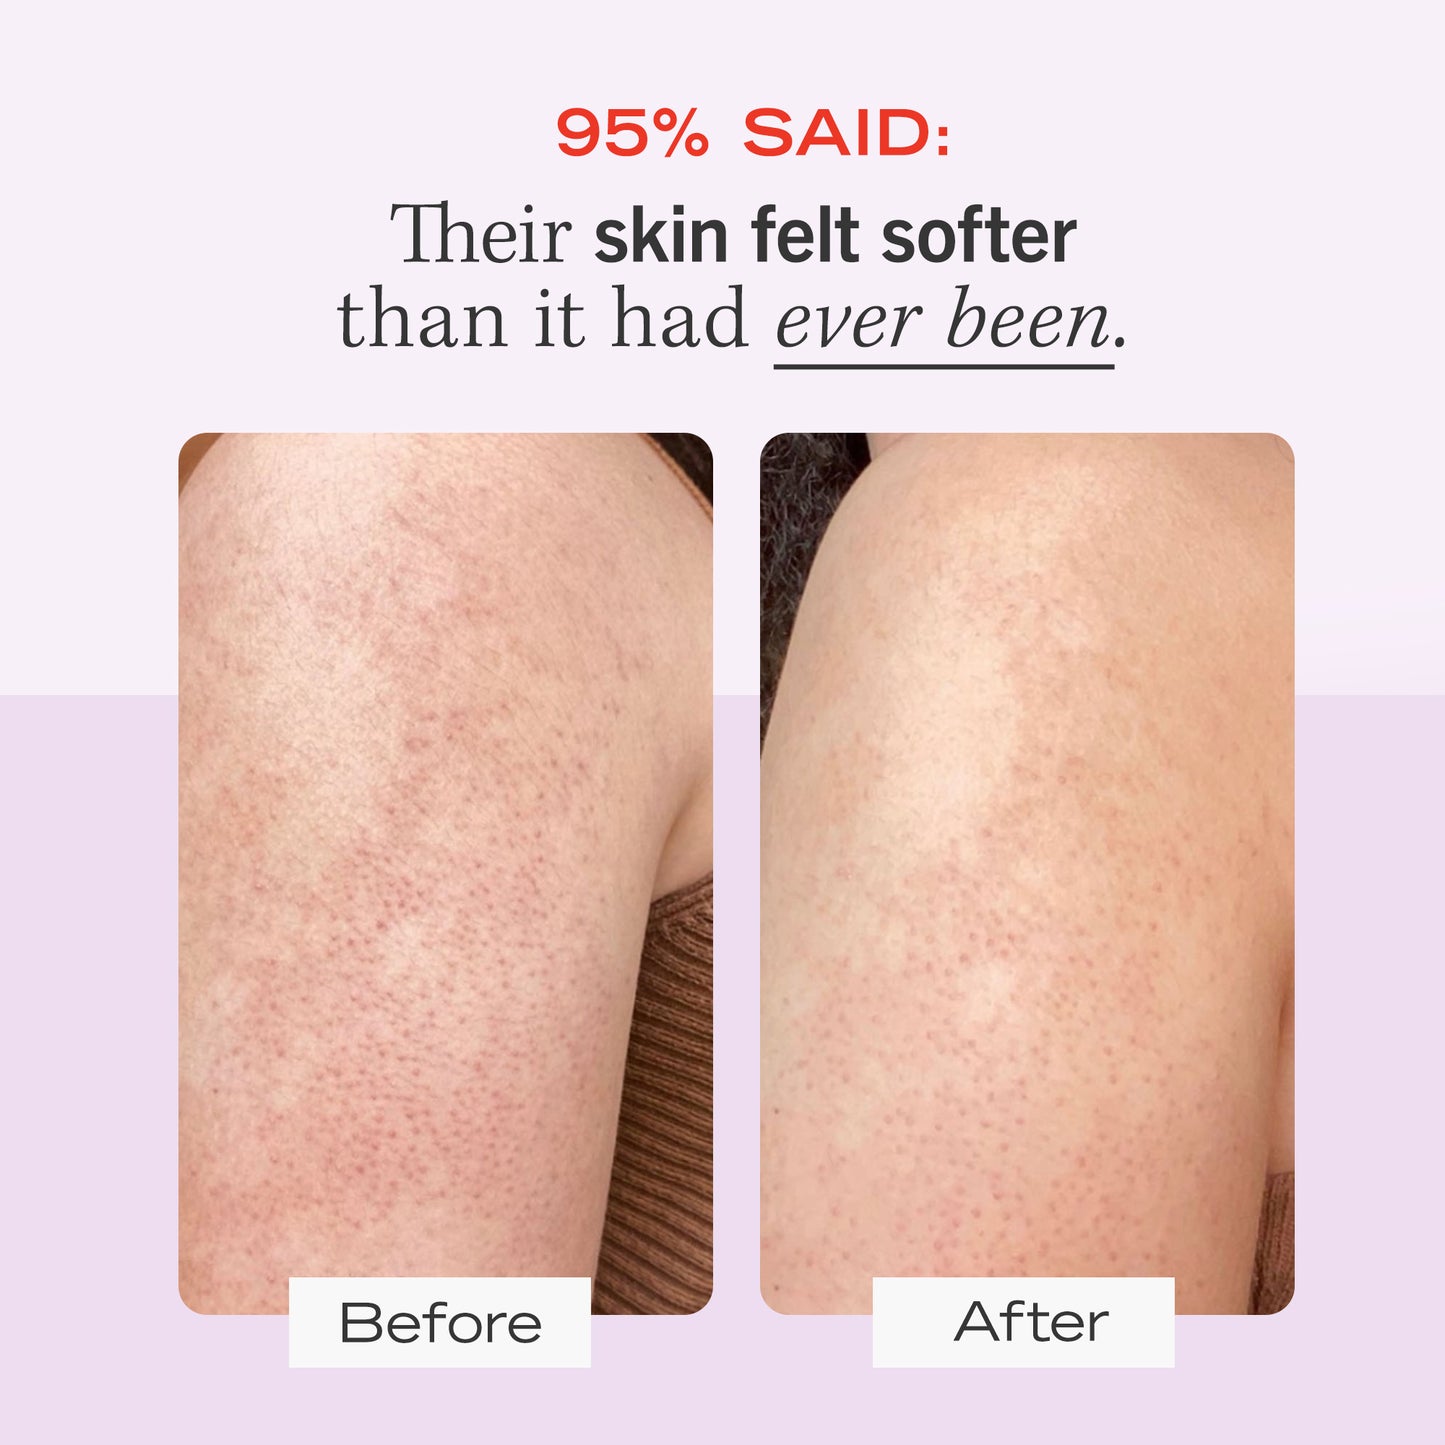 Skin on arm Before and After using KP Bump Eraser Body Scrub.  95% Said: Their skin felt softer than it had ever been.